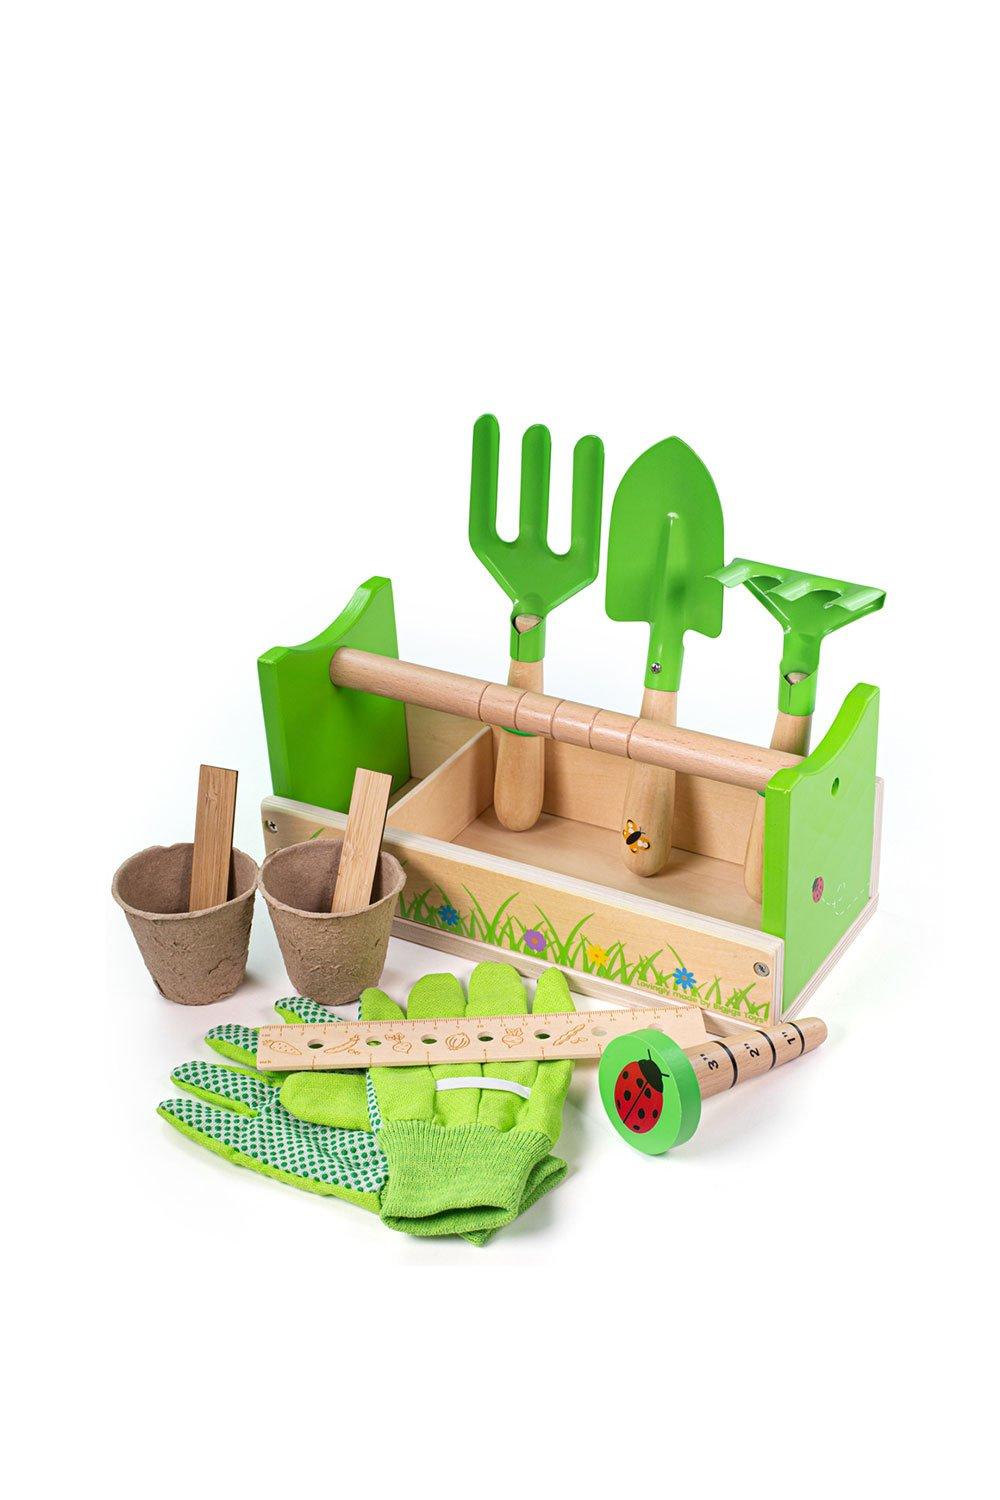 Gardening Caddy and Toy Tools